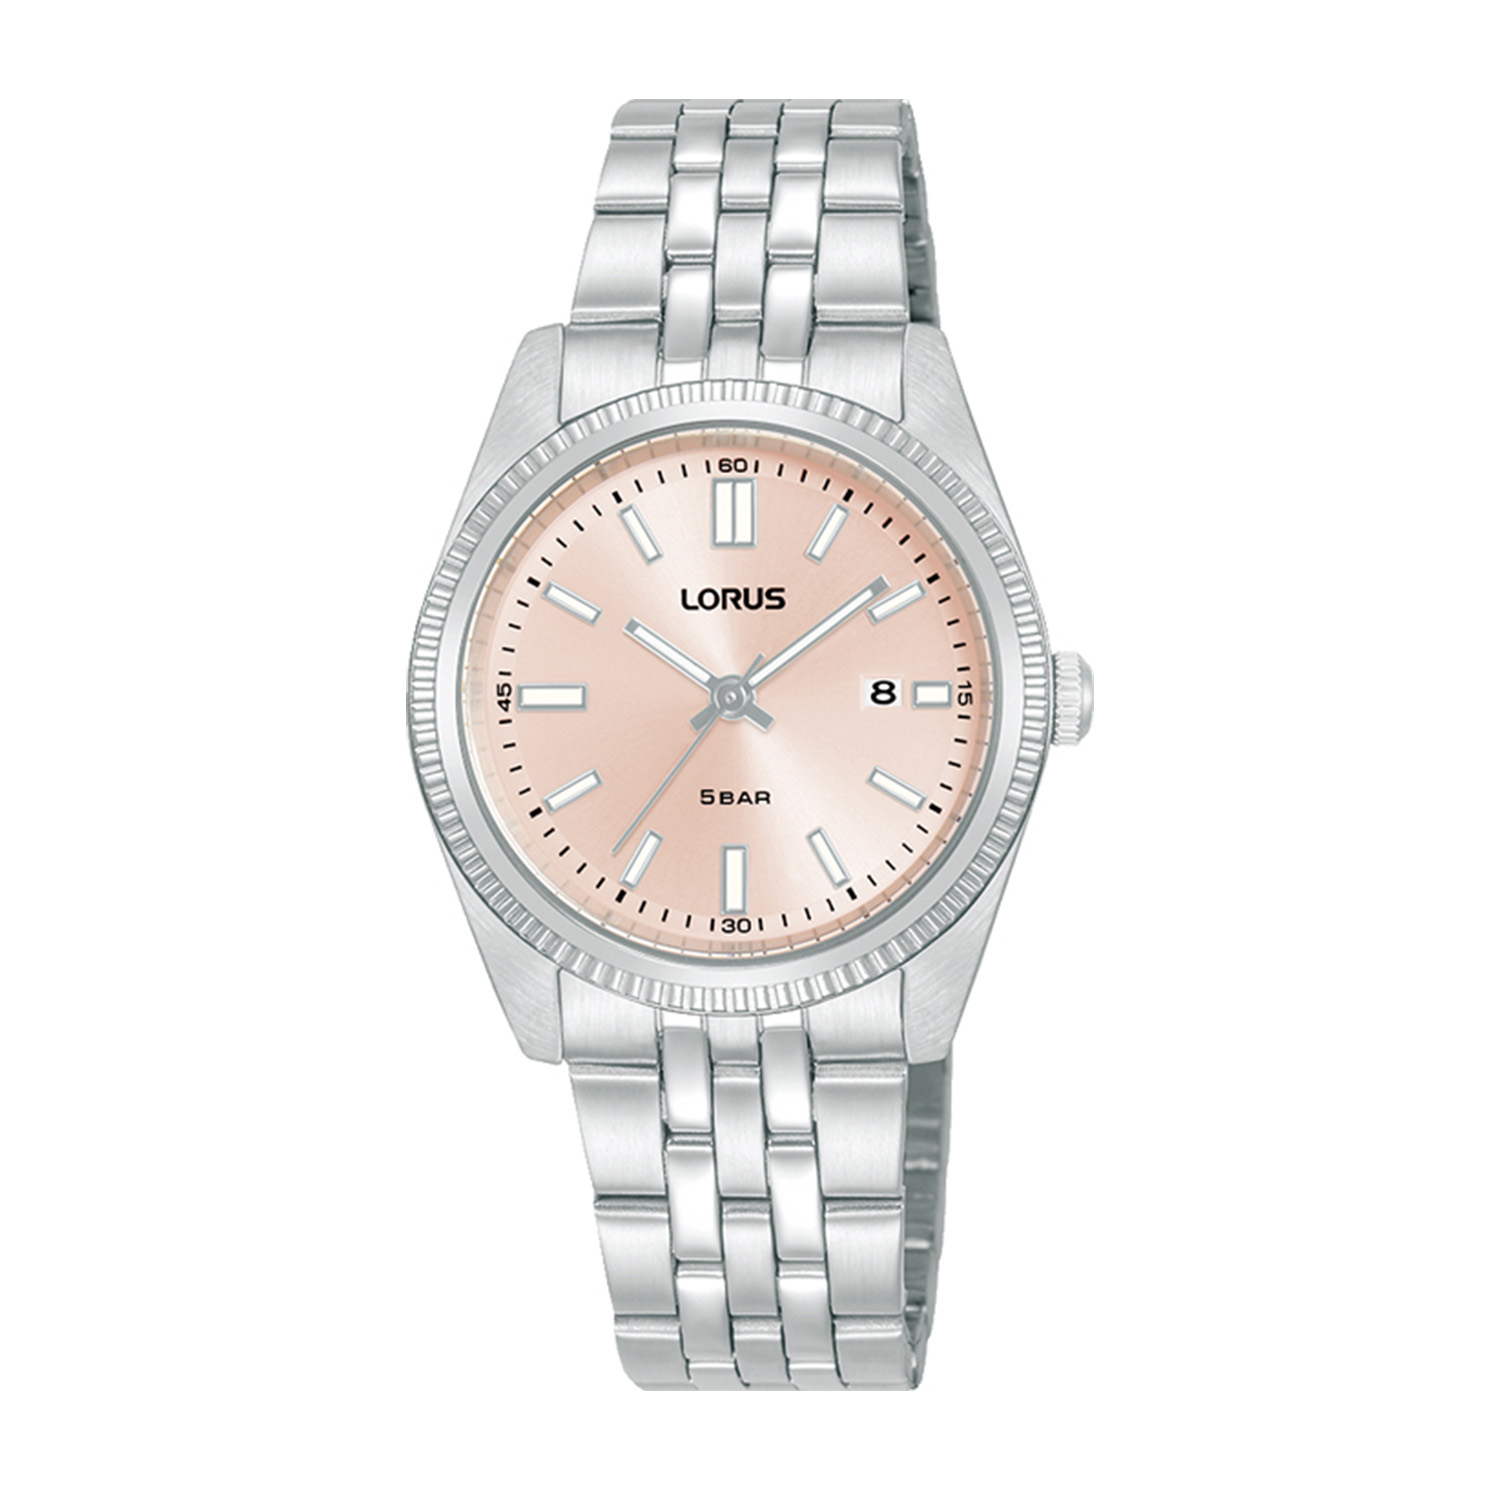 Womens watch LORUS made of silver stainless steel with pink dial and bracelet.